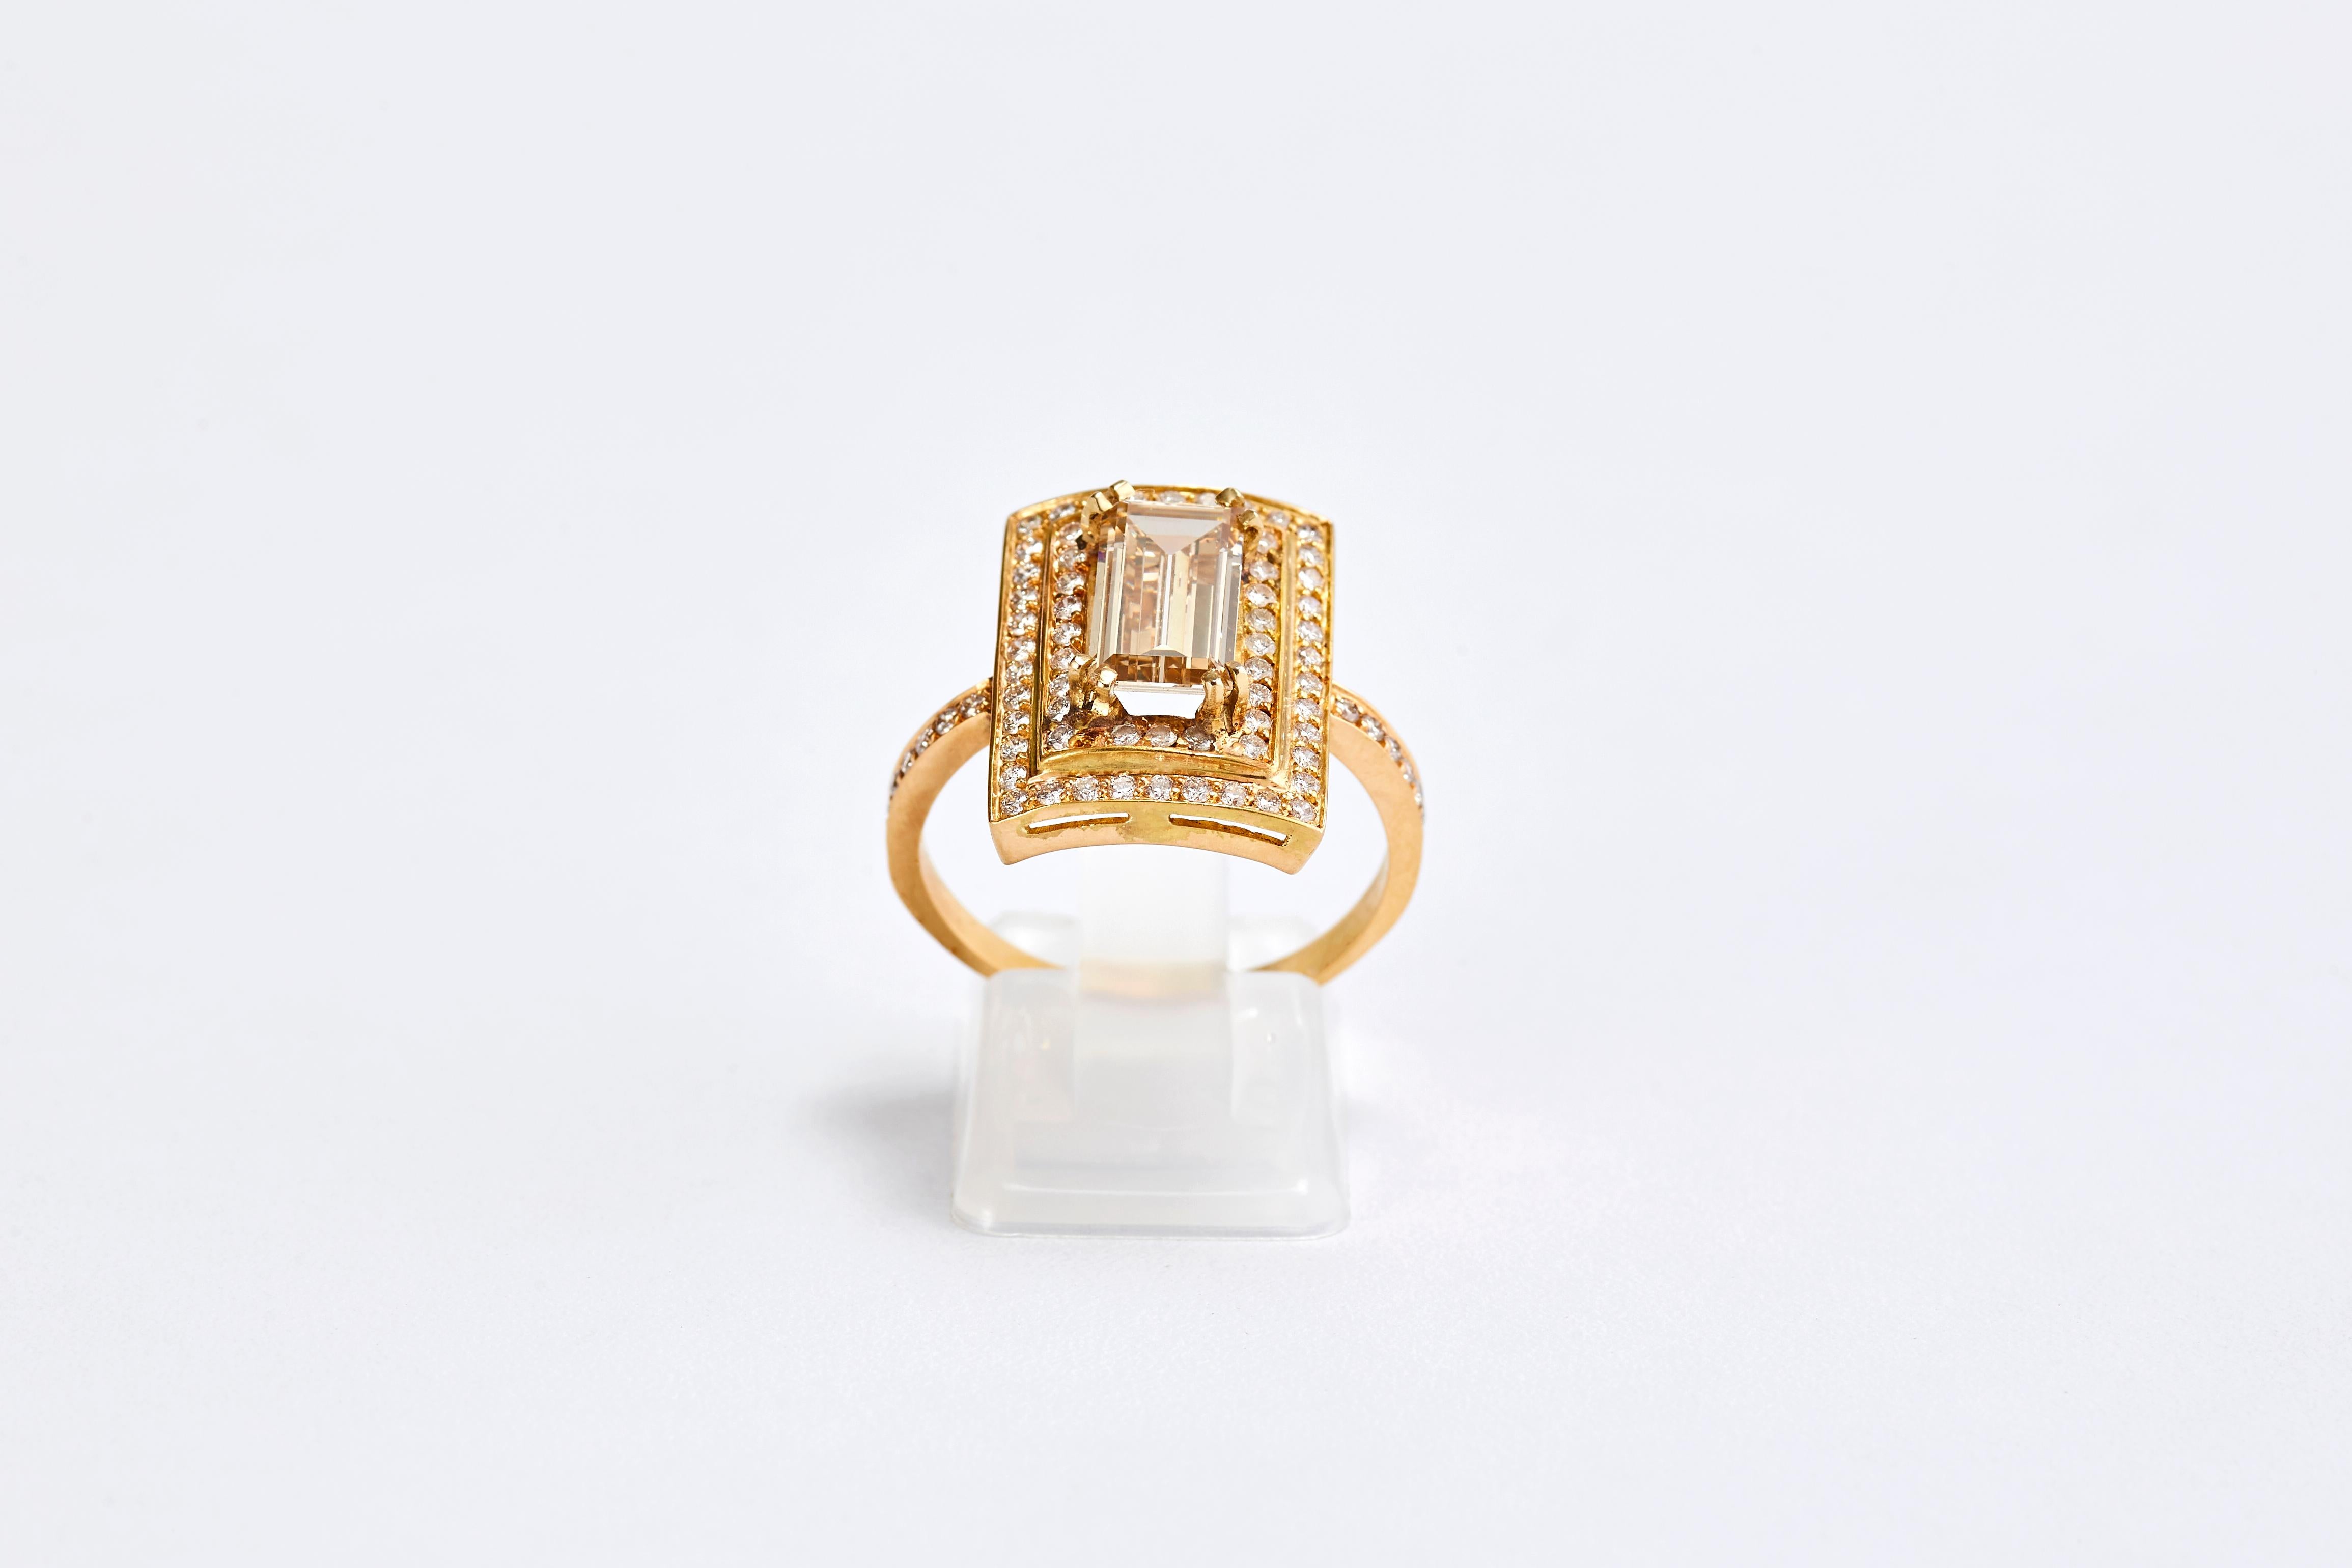 Emerald Cut Diamond and 14 Karat Yellow Gold Ring with Double Halo of Diamonds For Sale 1